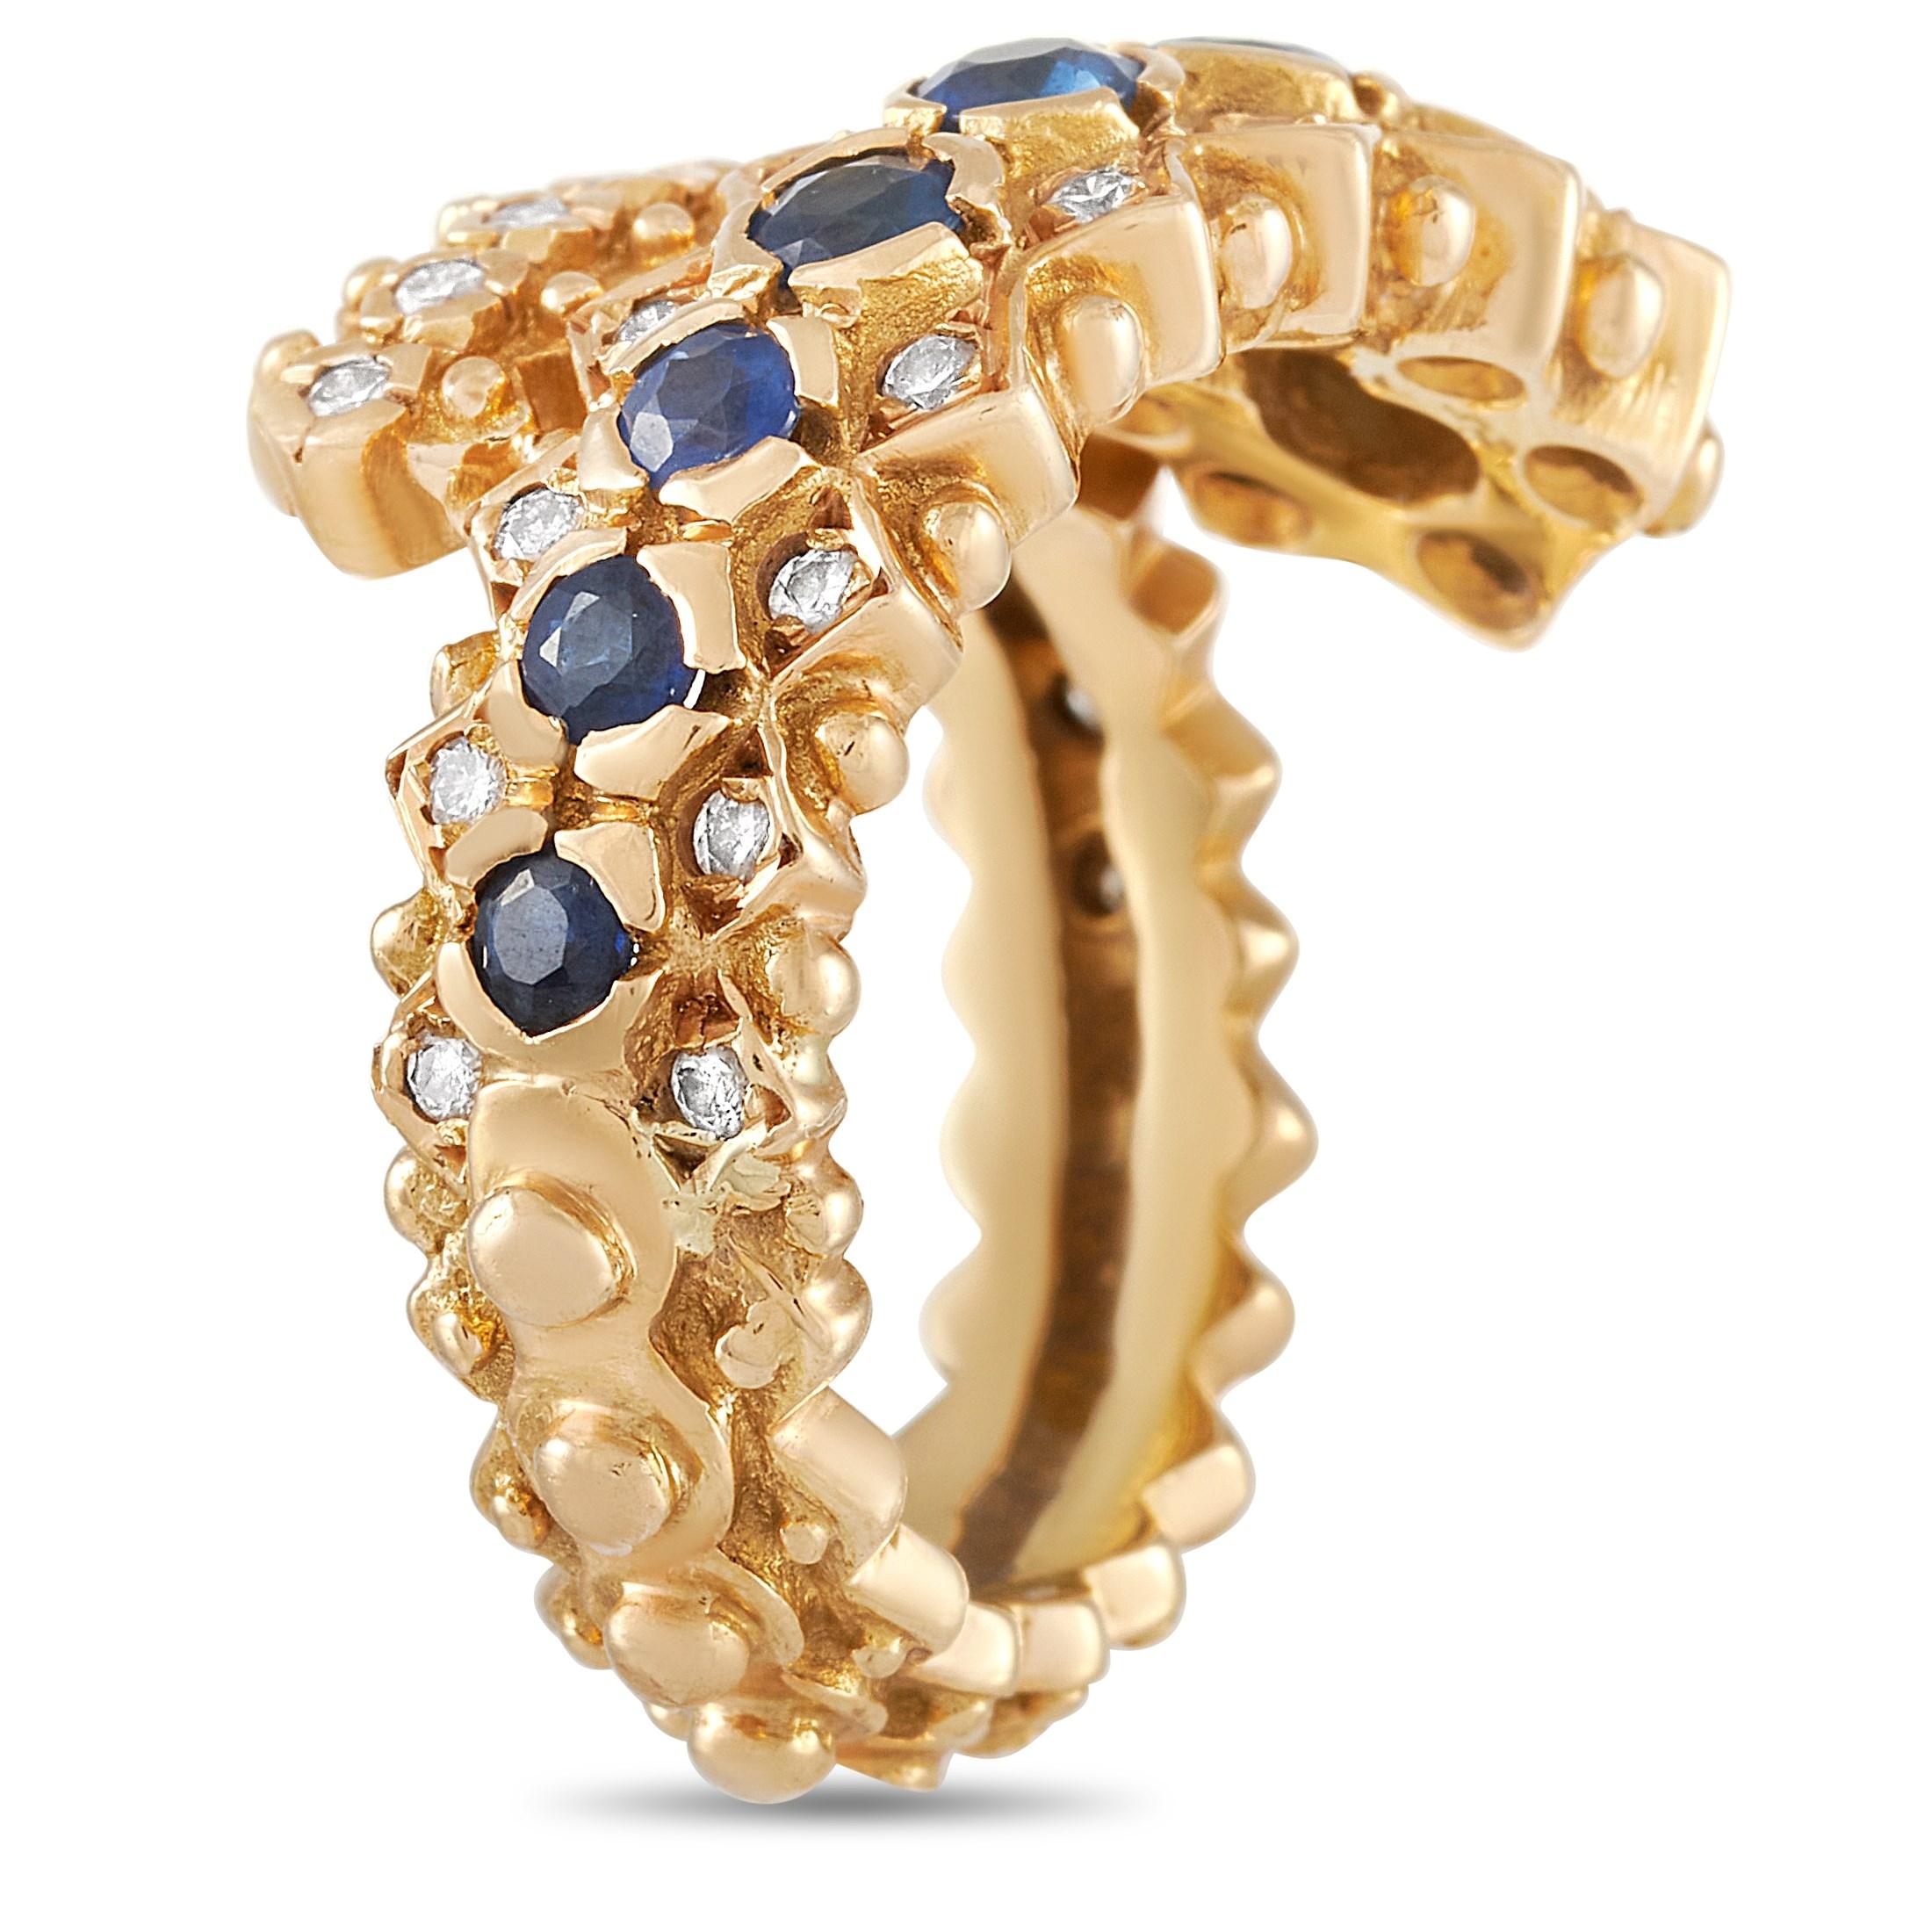 This Ilias Lalaounis 18K Yellow Gold Diamond and Sapphire Ring is a dramatic statement piece made with 18K yellow gold that wraps around the finger. The band is set with round-cut diamond and sapphires around the ring. The ring has a band thickness